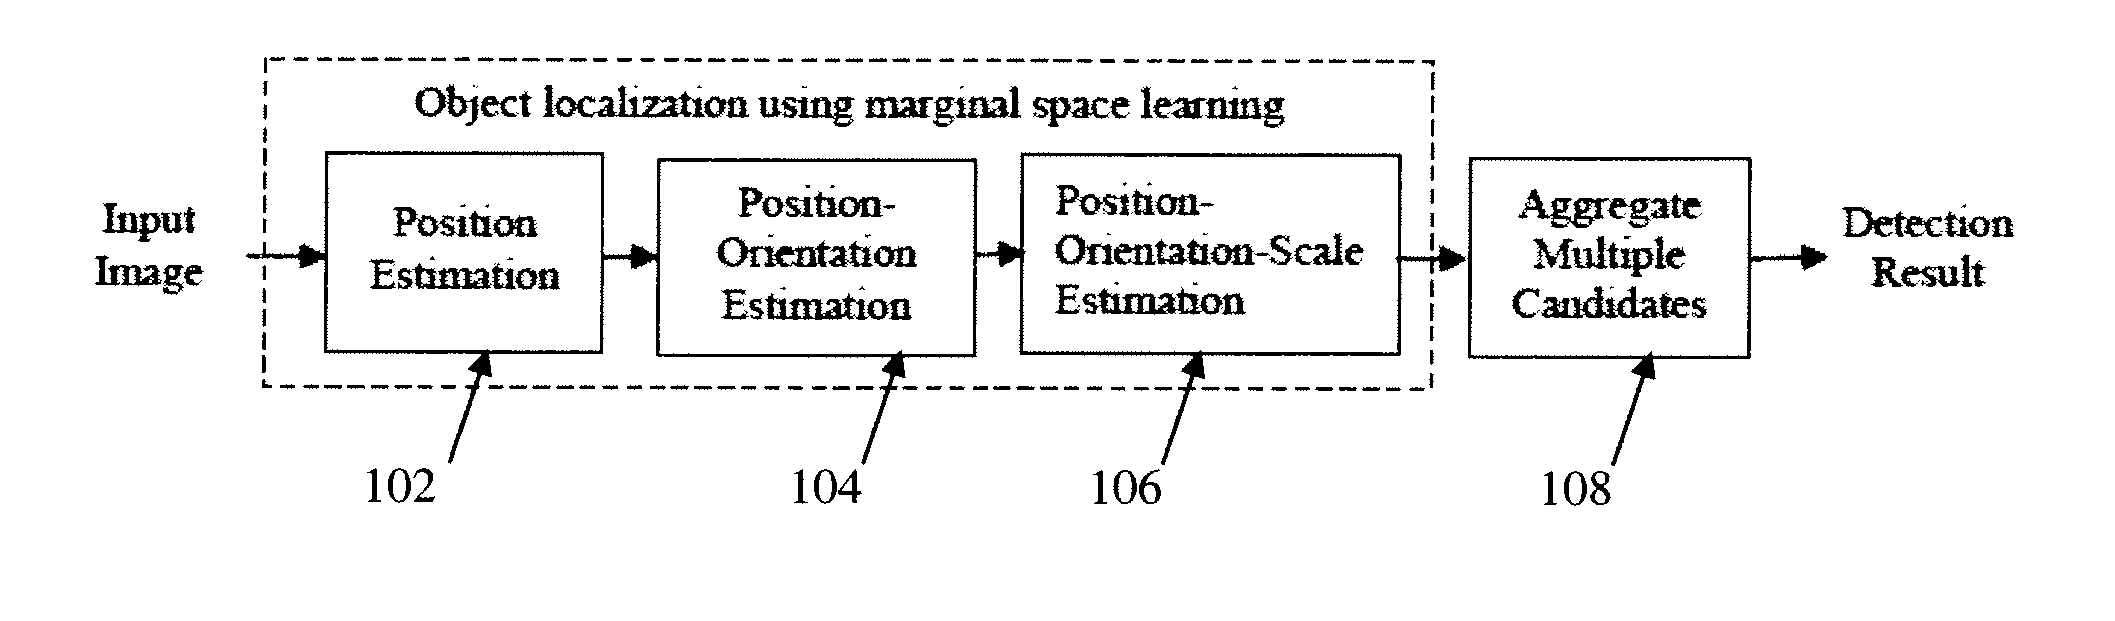 Method and System for Left Ventricle Detection in 2D Magnetic Resonance Images Using Ranking Based Multi-Detector Aggregation